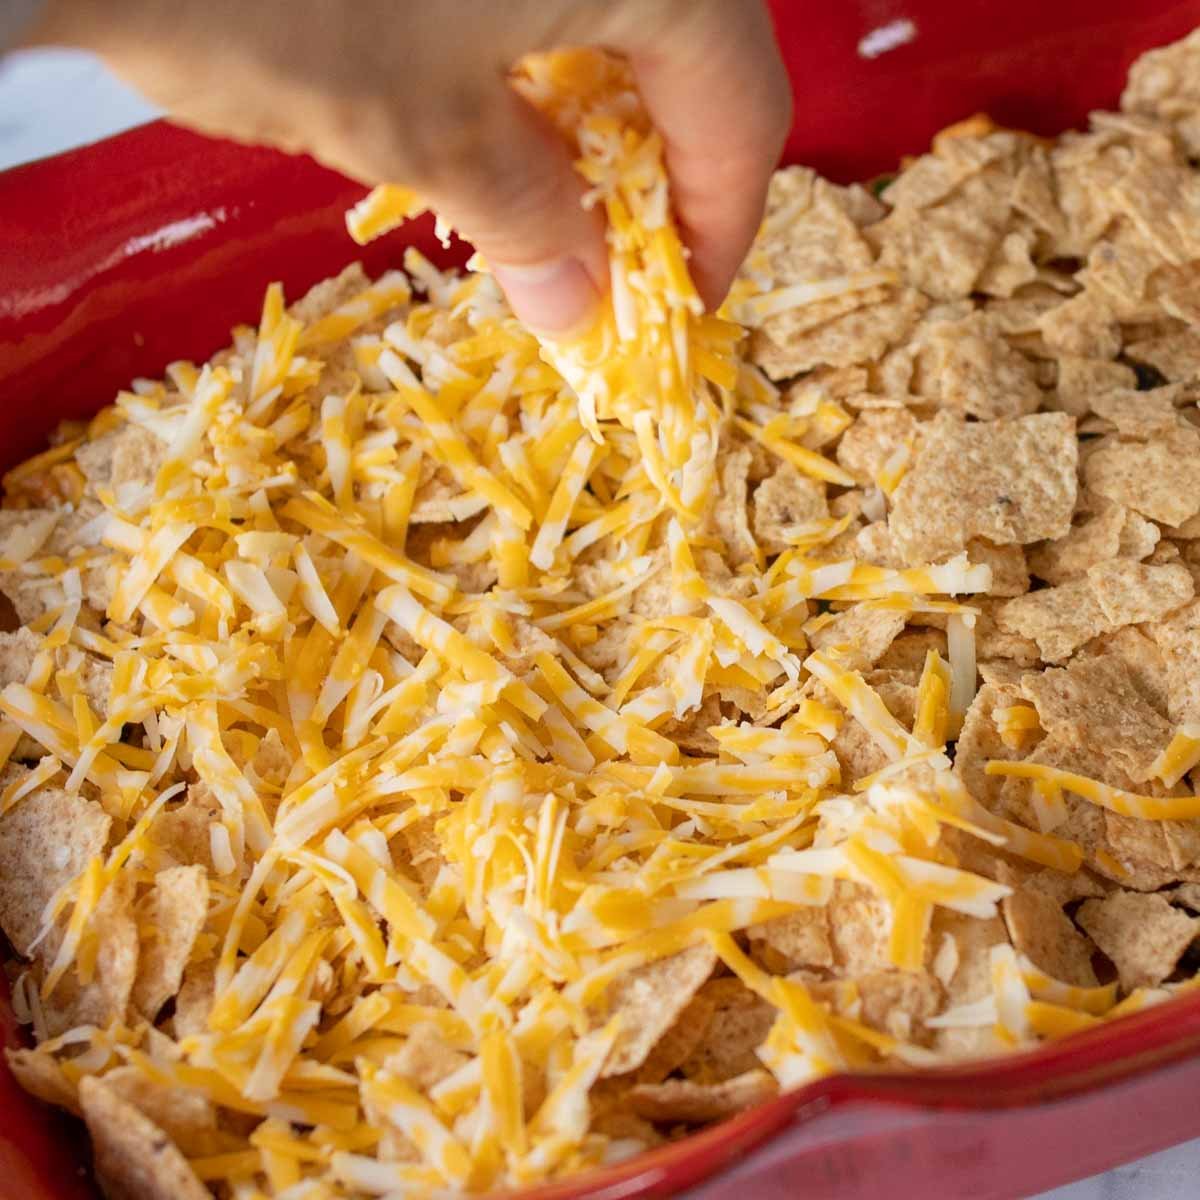 cheese sprinkled over chips.